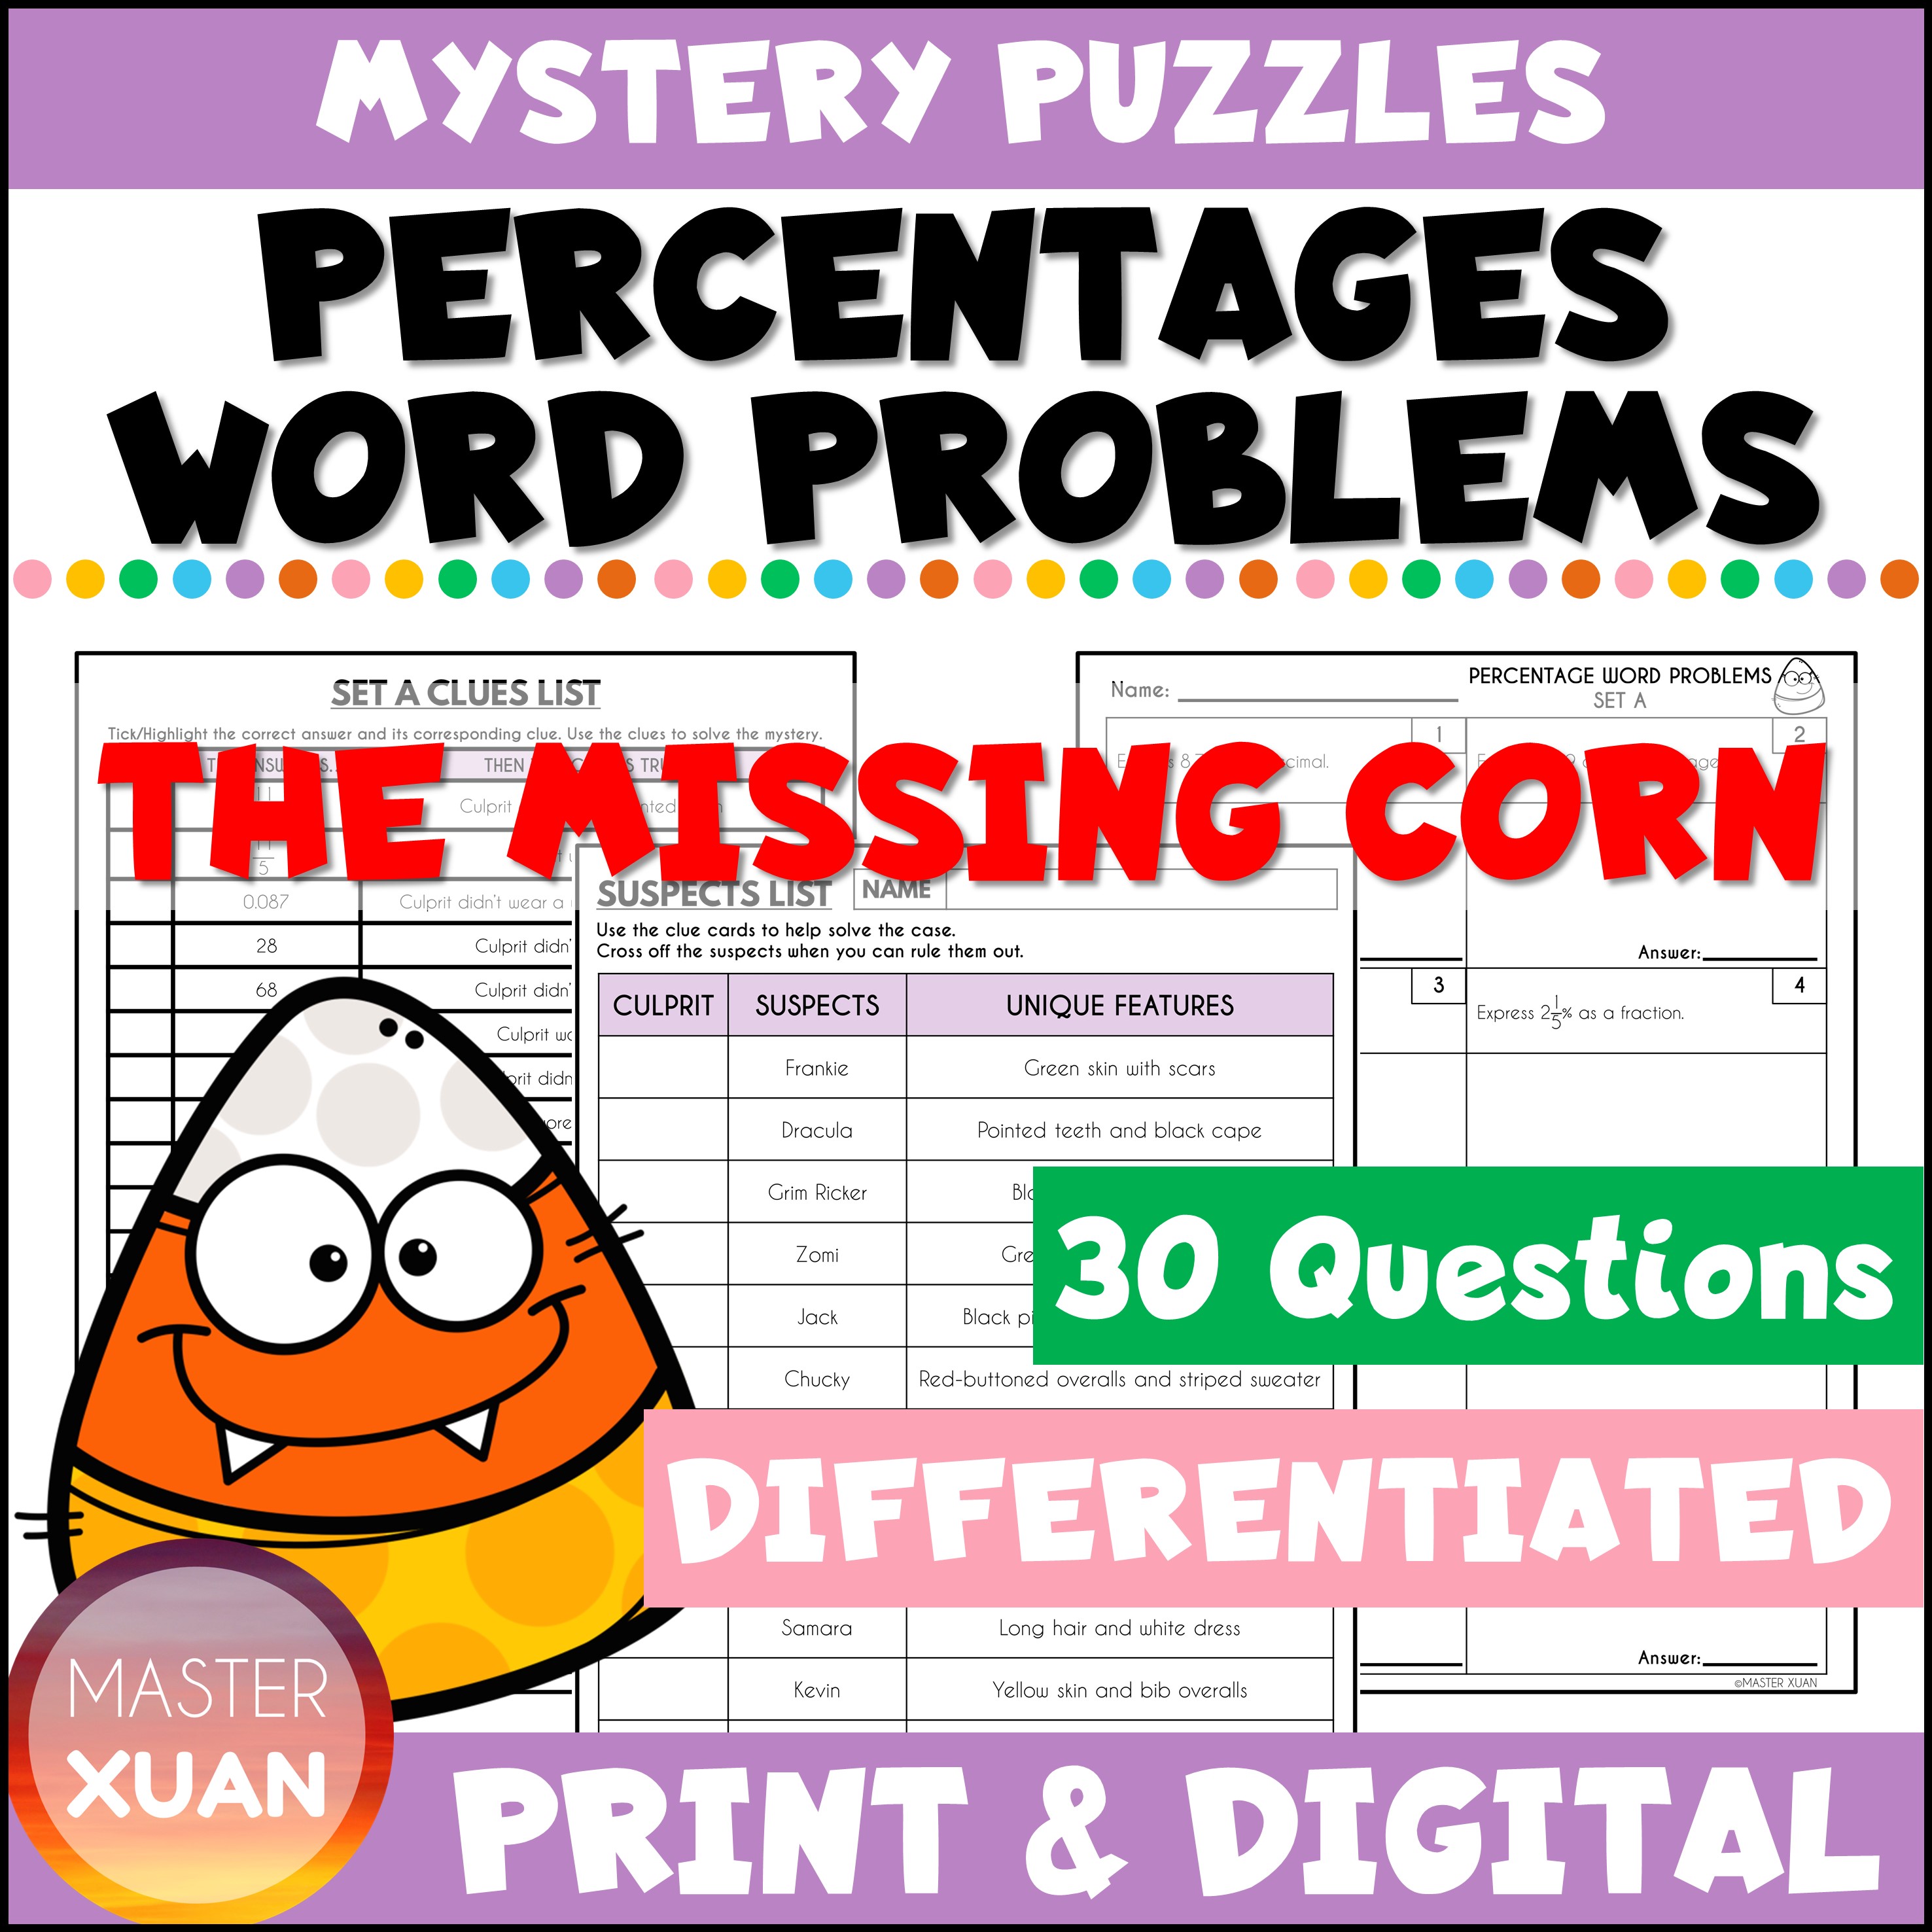 percentages word problems worksheets can be fun with math mystery puzzles